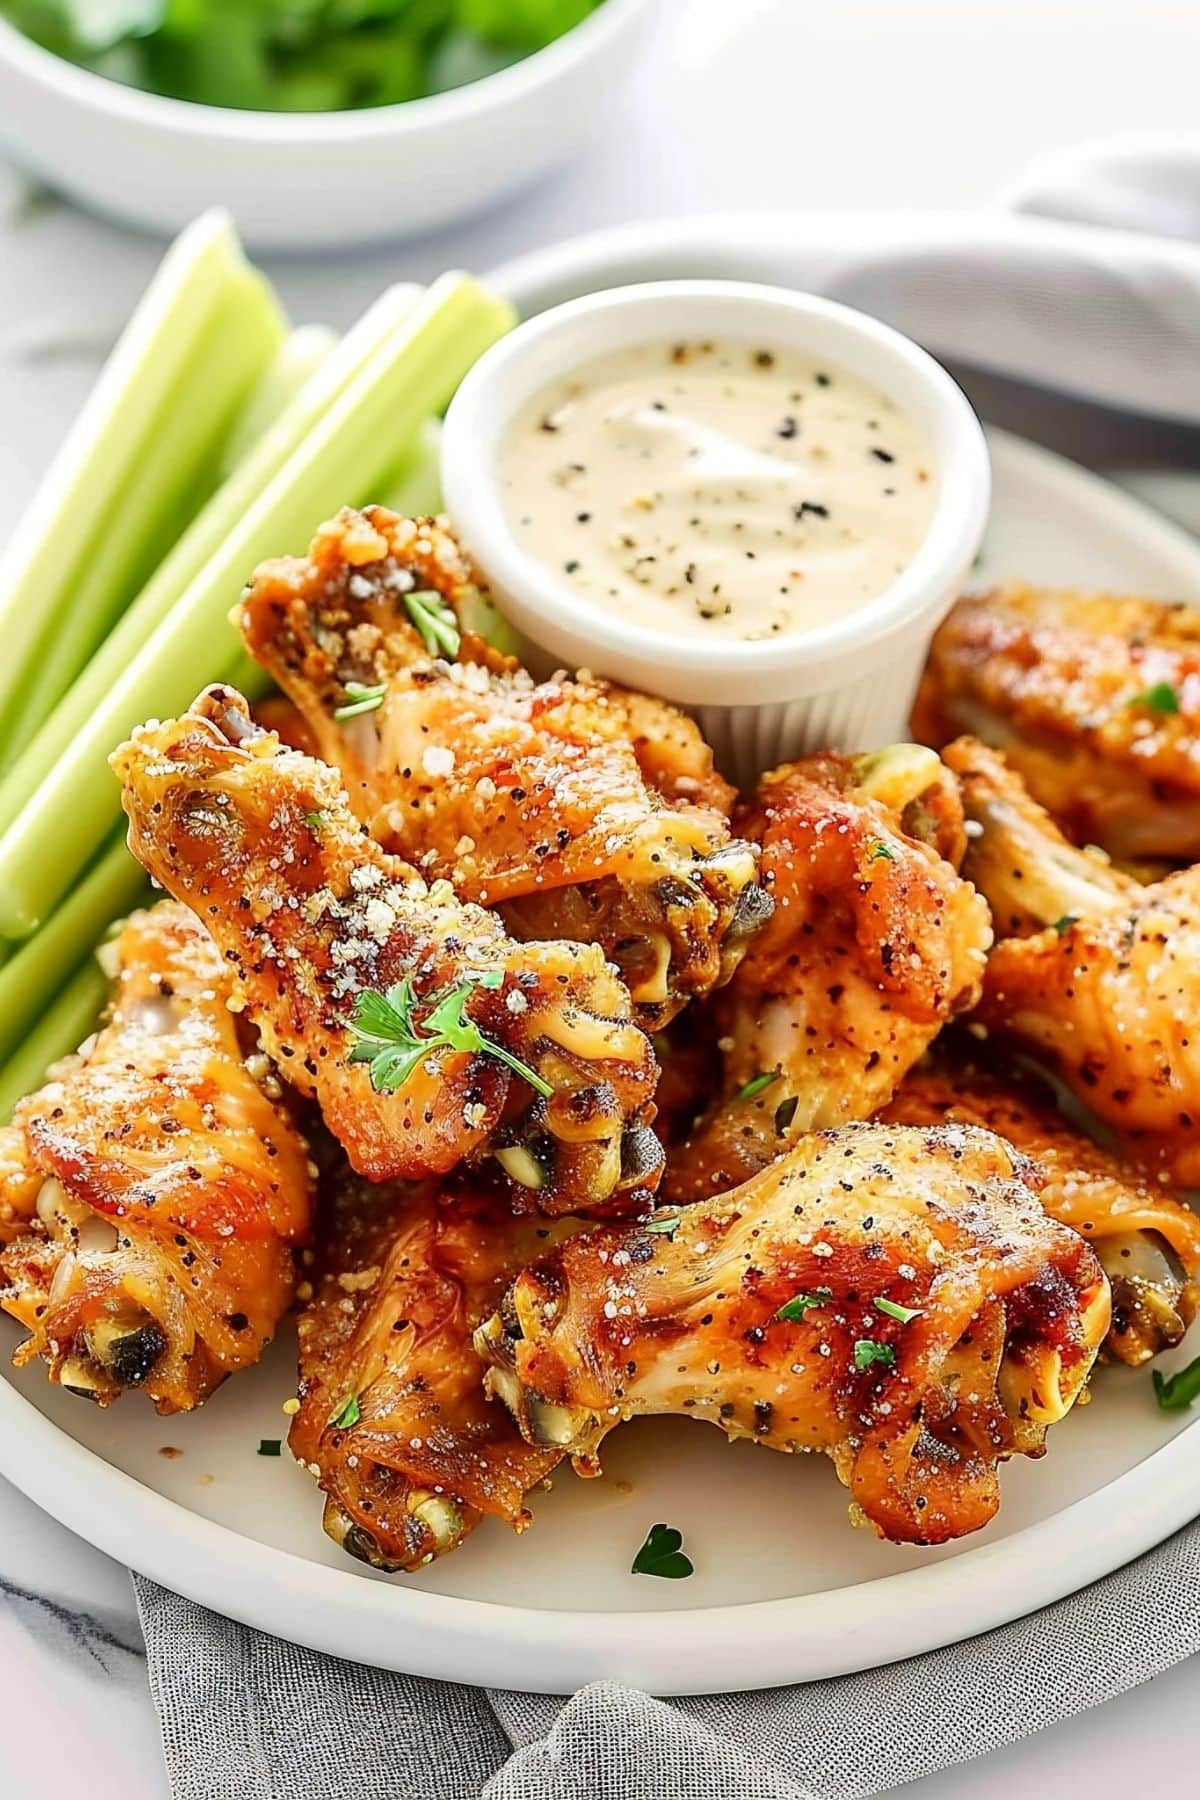 Close Up of a Pile of Crispy, Seasoned Wingstop Garlic Parmesan Wings with Celery and Ranch Dip on a White Plate